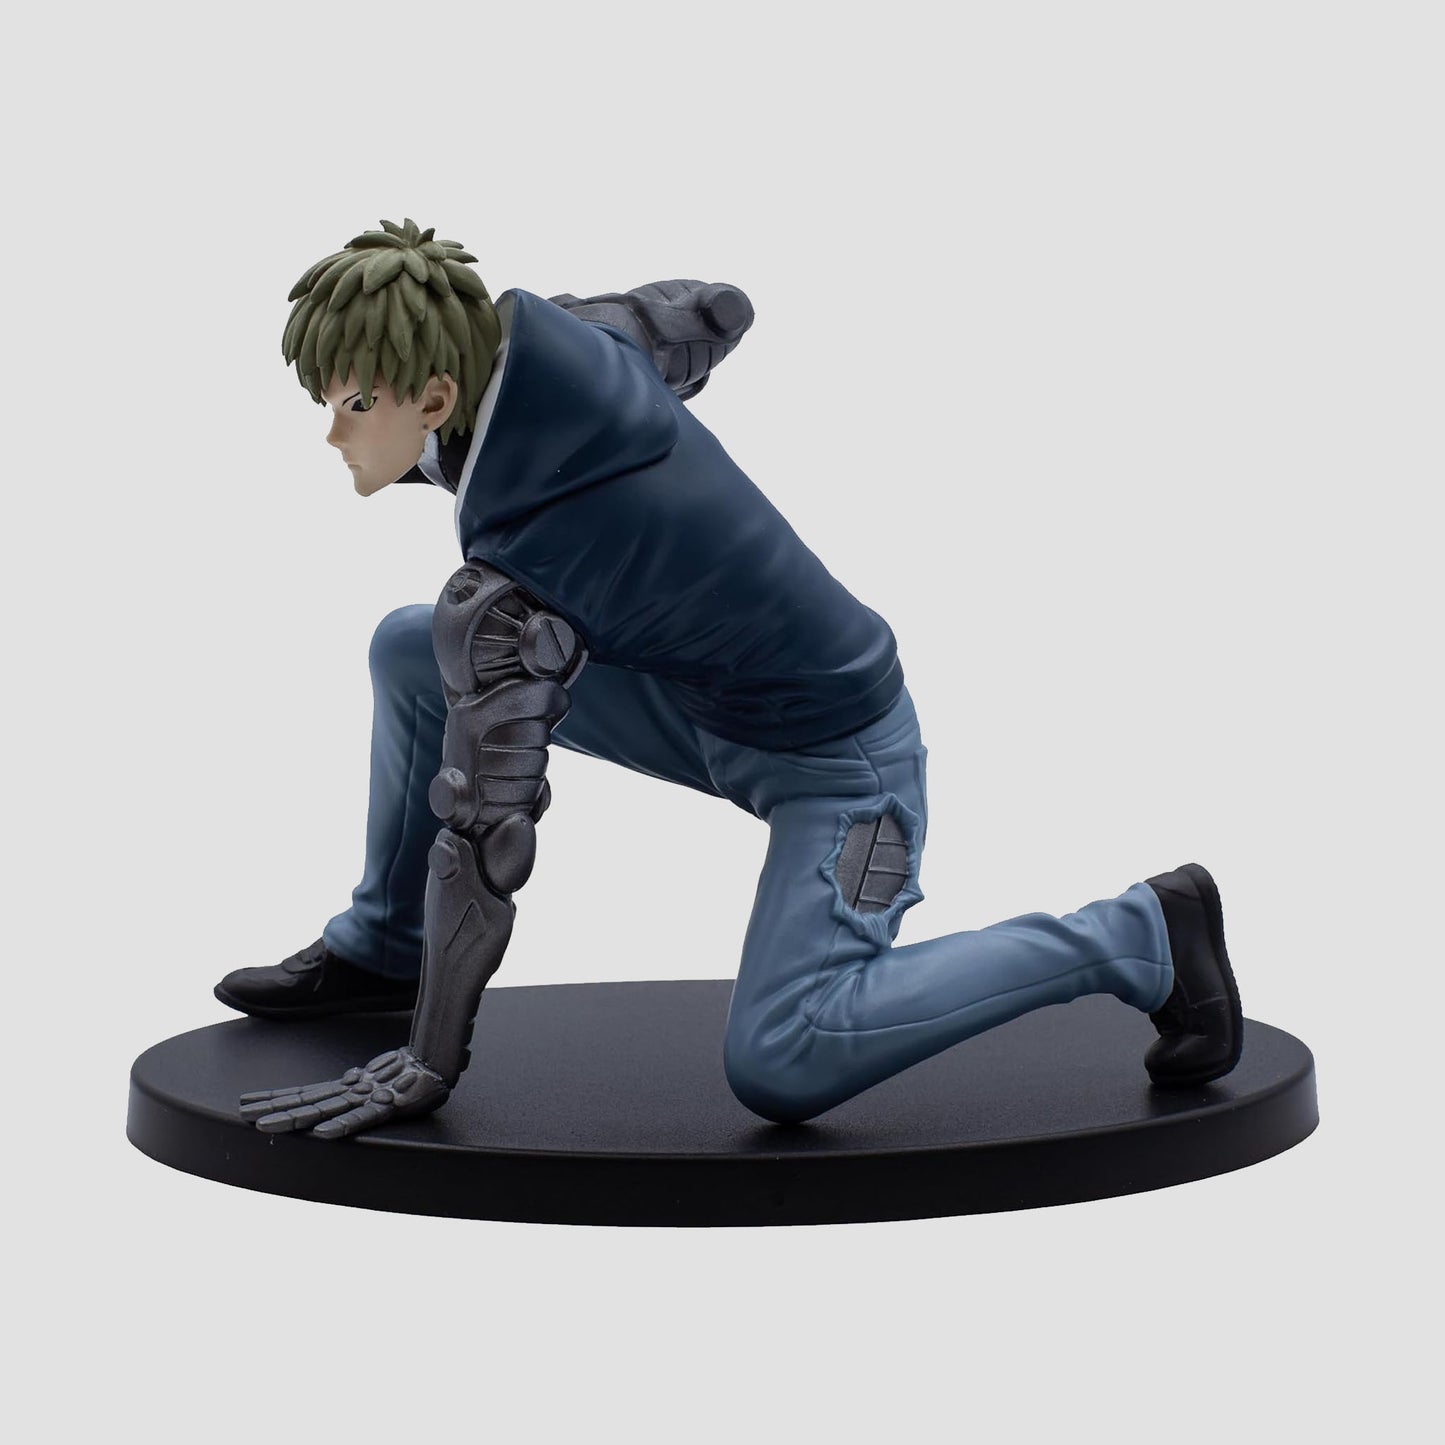 Genos (One Punch Man) Vol. 2 Non-Scale Statue